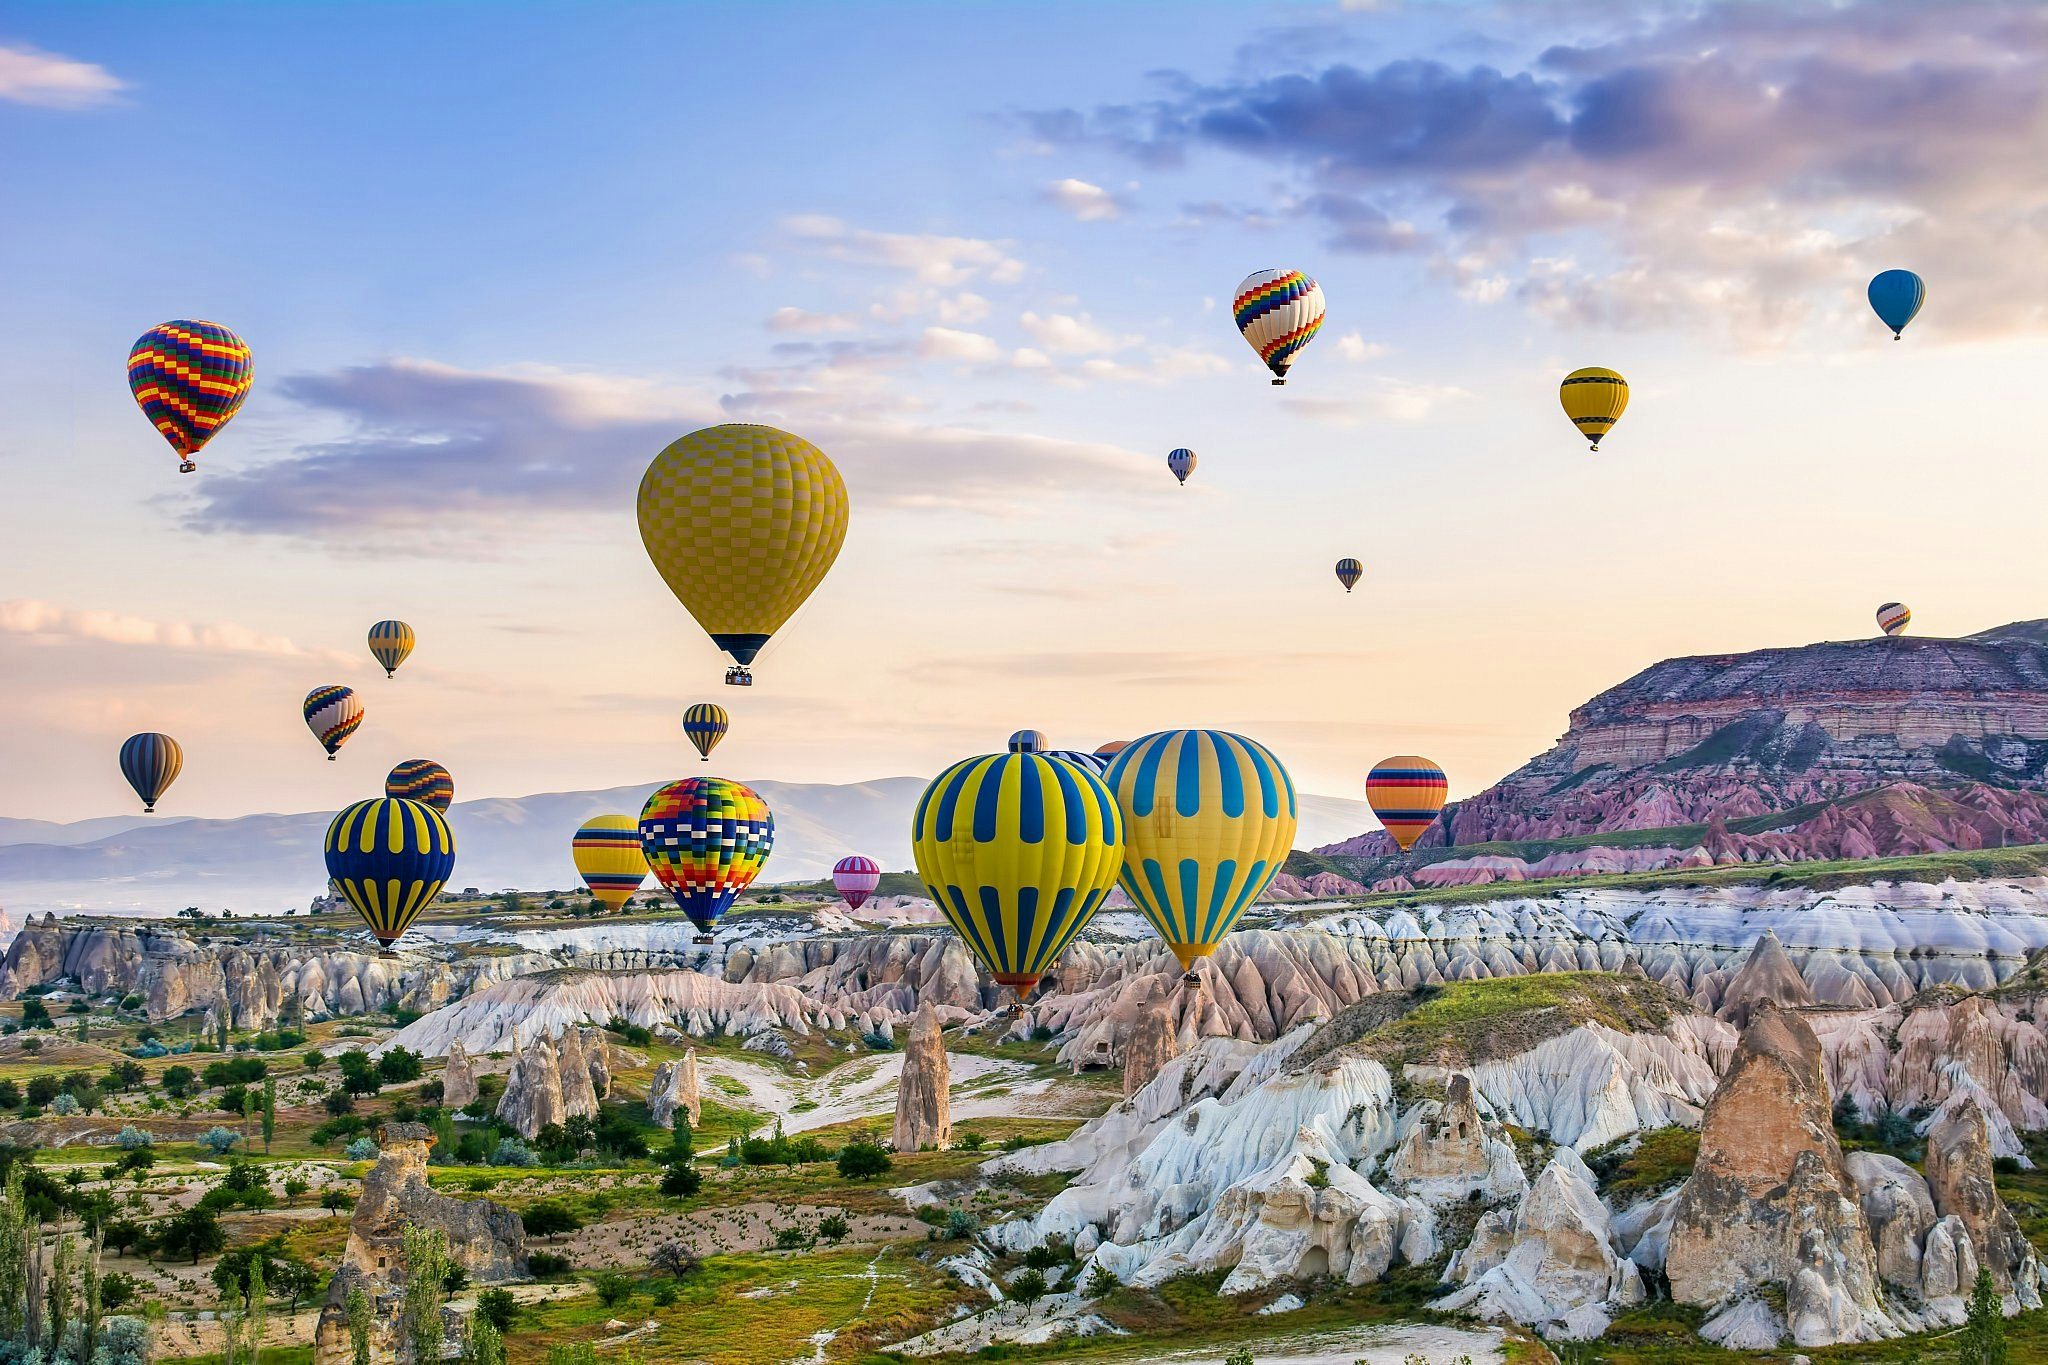 Colourful hot air balloons fly at dawn under a pink sky over a landscape of fantastical rock formations in Cappadocia, Turkey